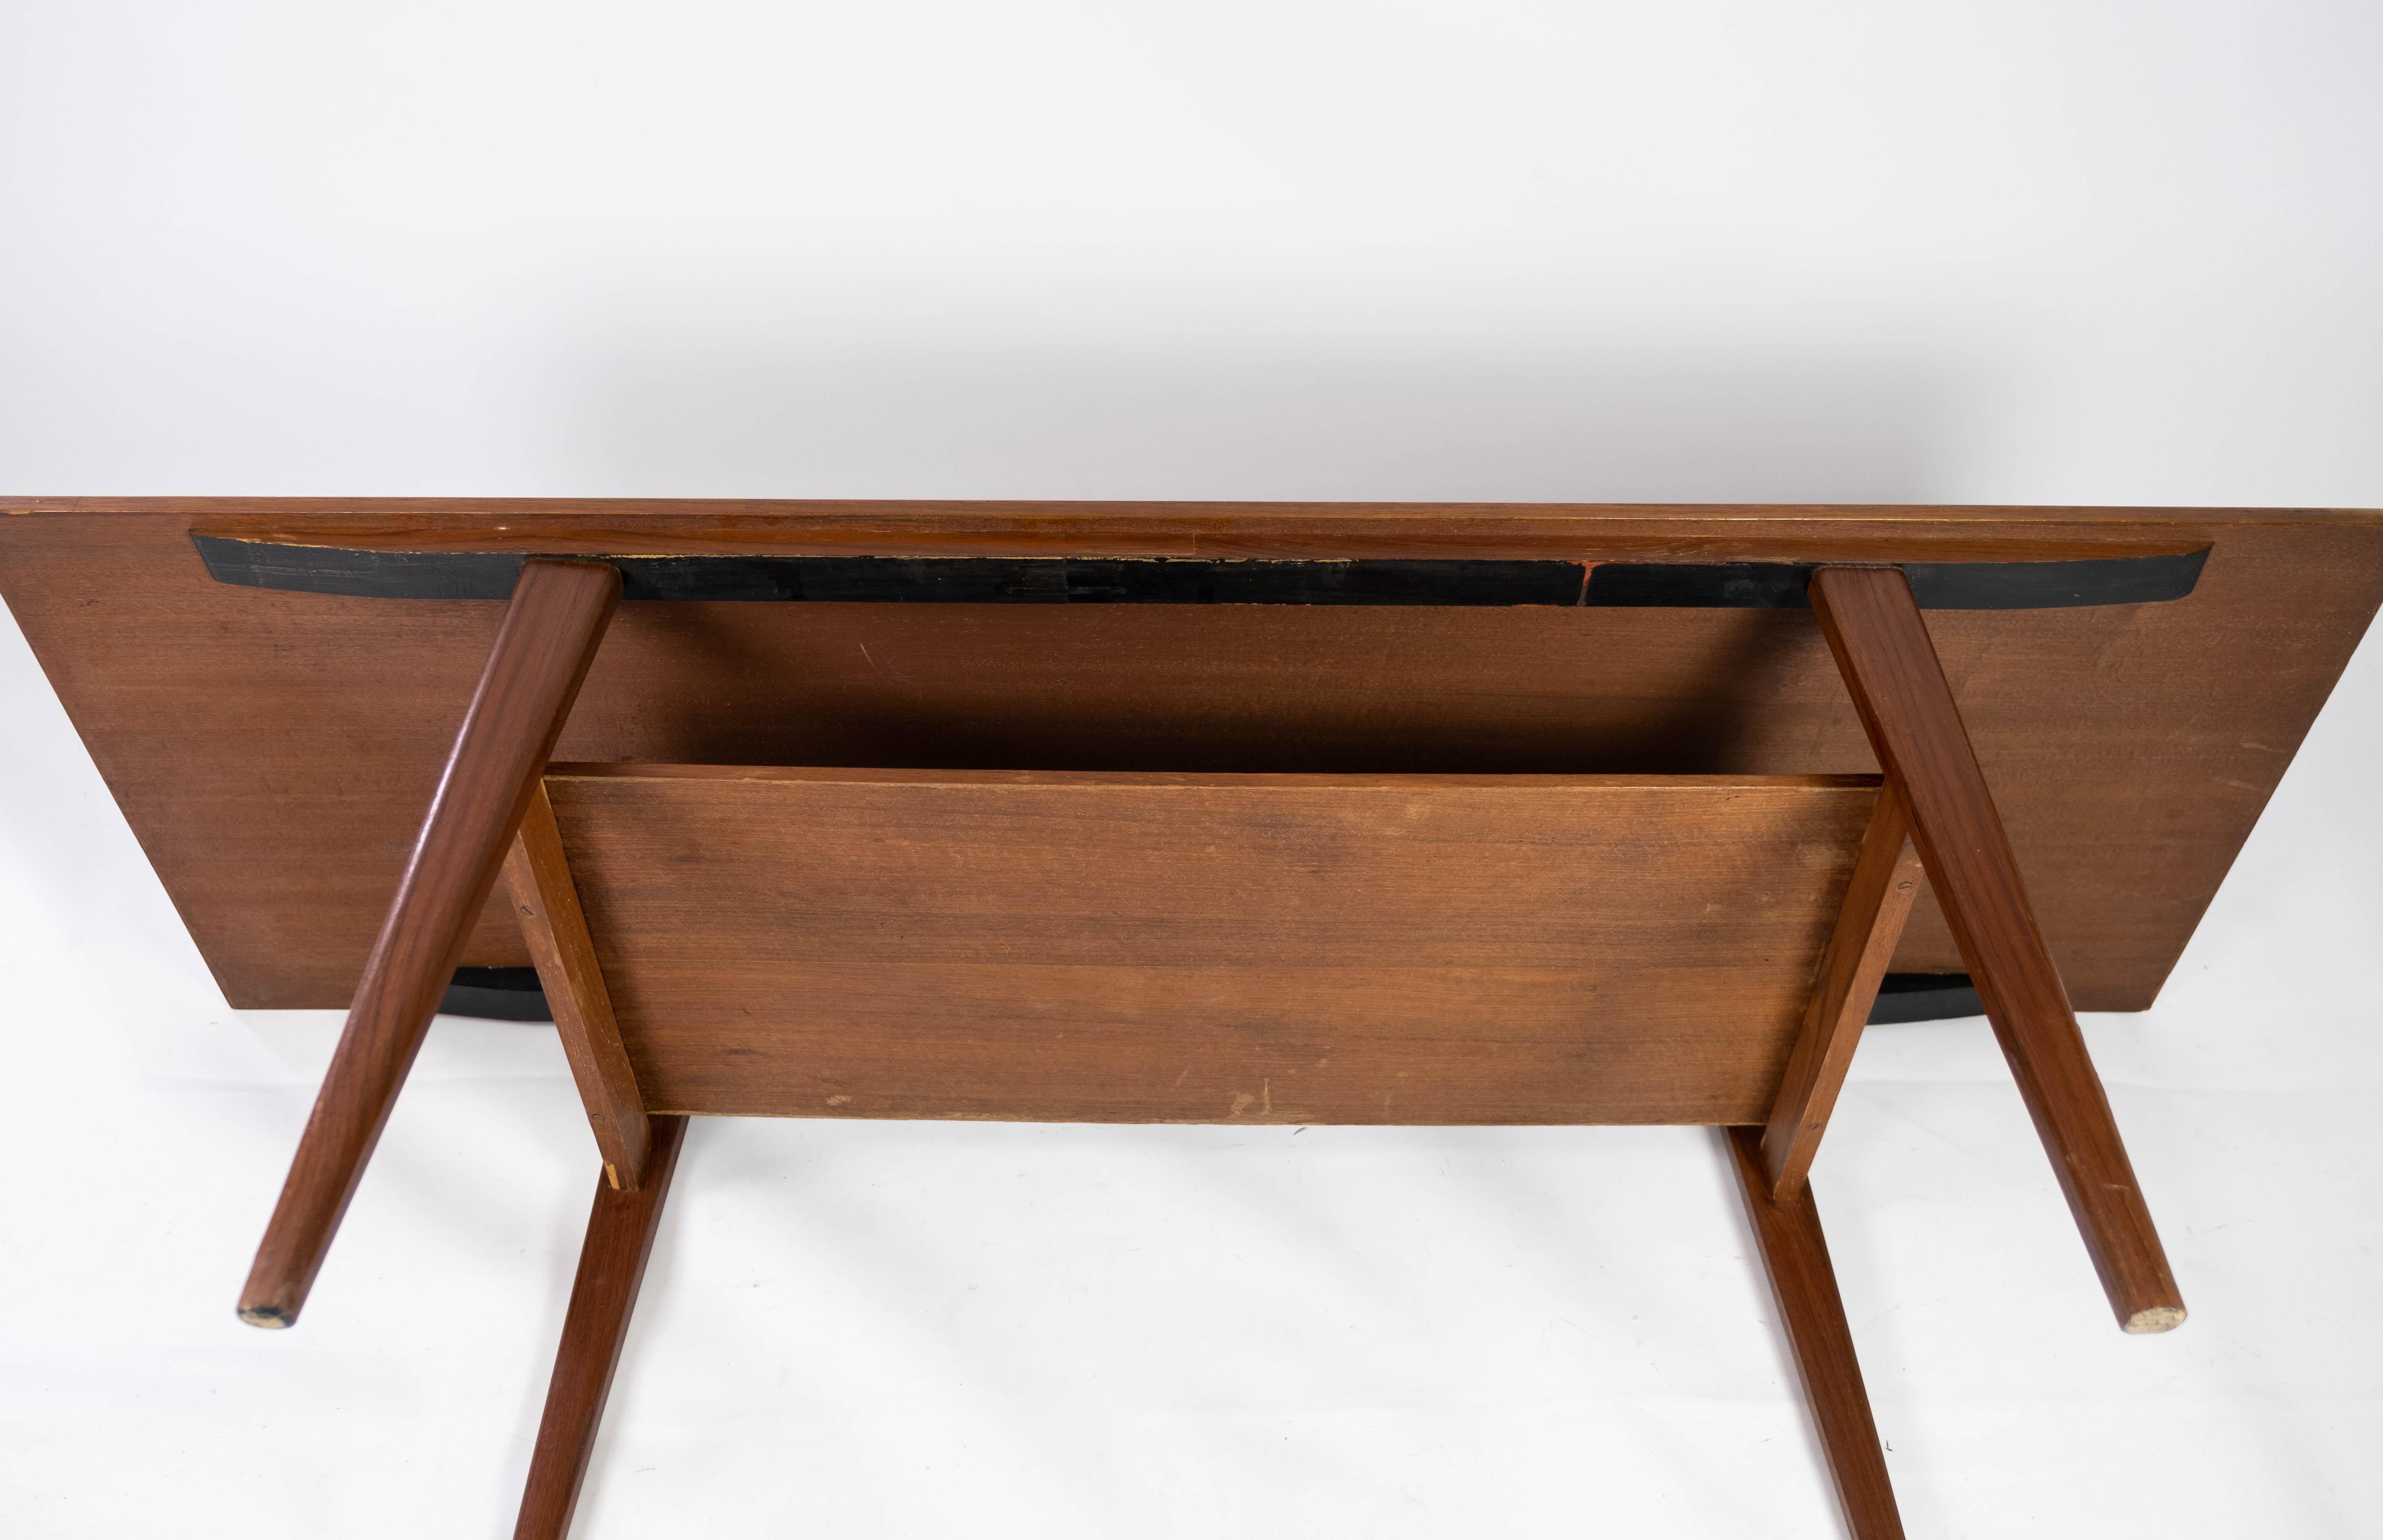 Coffee Table Made In Teak With Shelf, Danish Design From 1960s For Sale 9